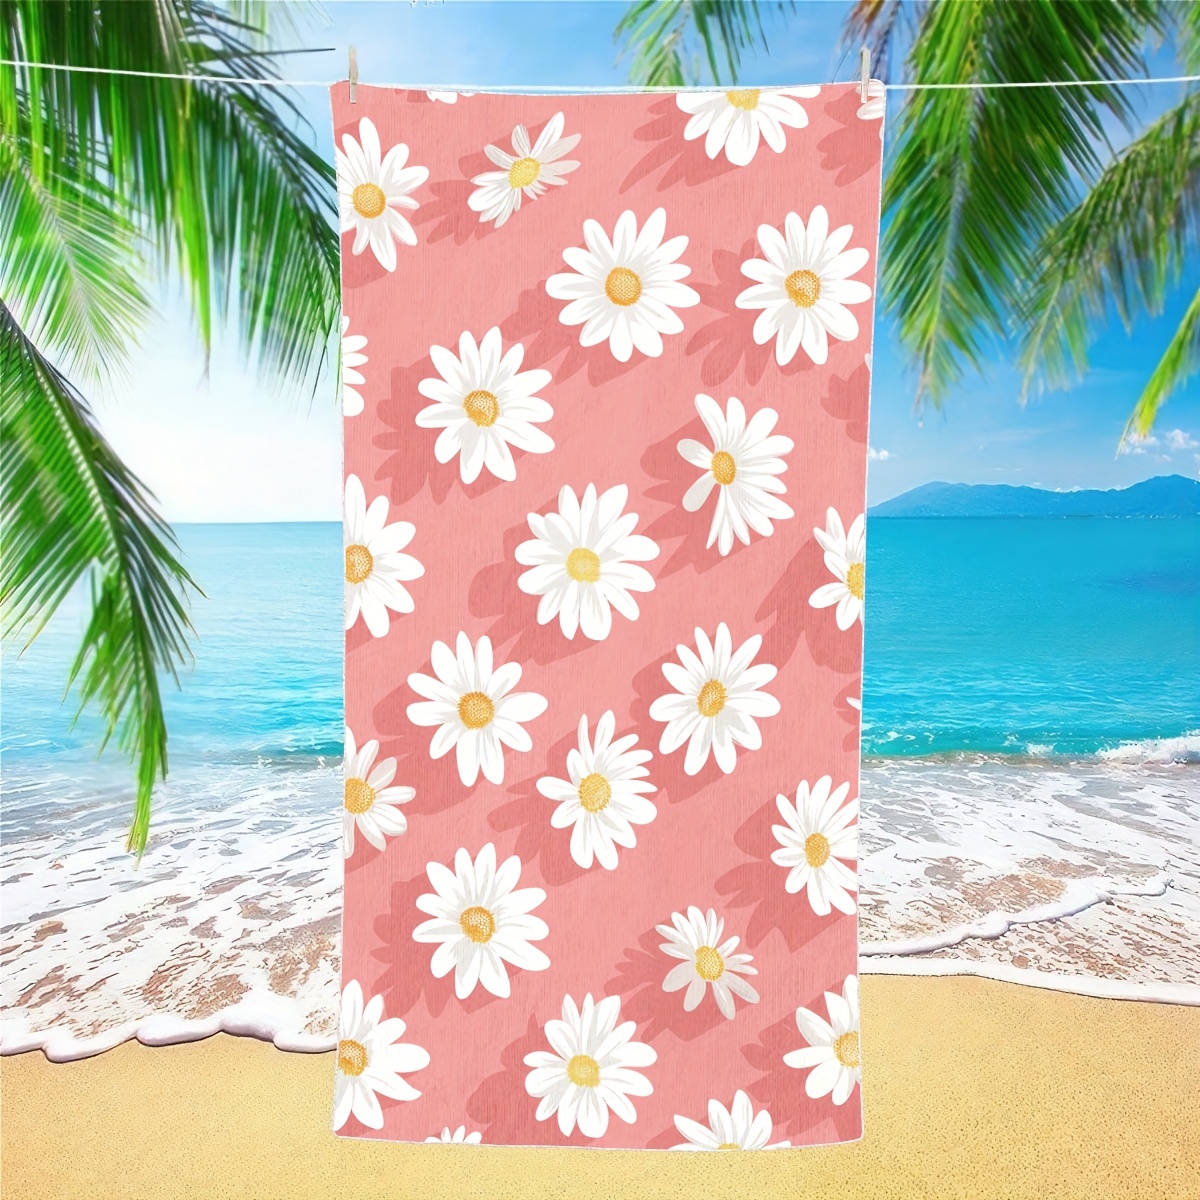 

Extra Large Floral Beach Towel - Super Absorbent, Quick-dry, Soft Microfiber - Ideal For Pool, Swim, Travel & Camping - Machine Washable